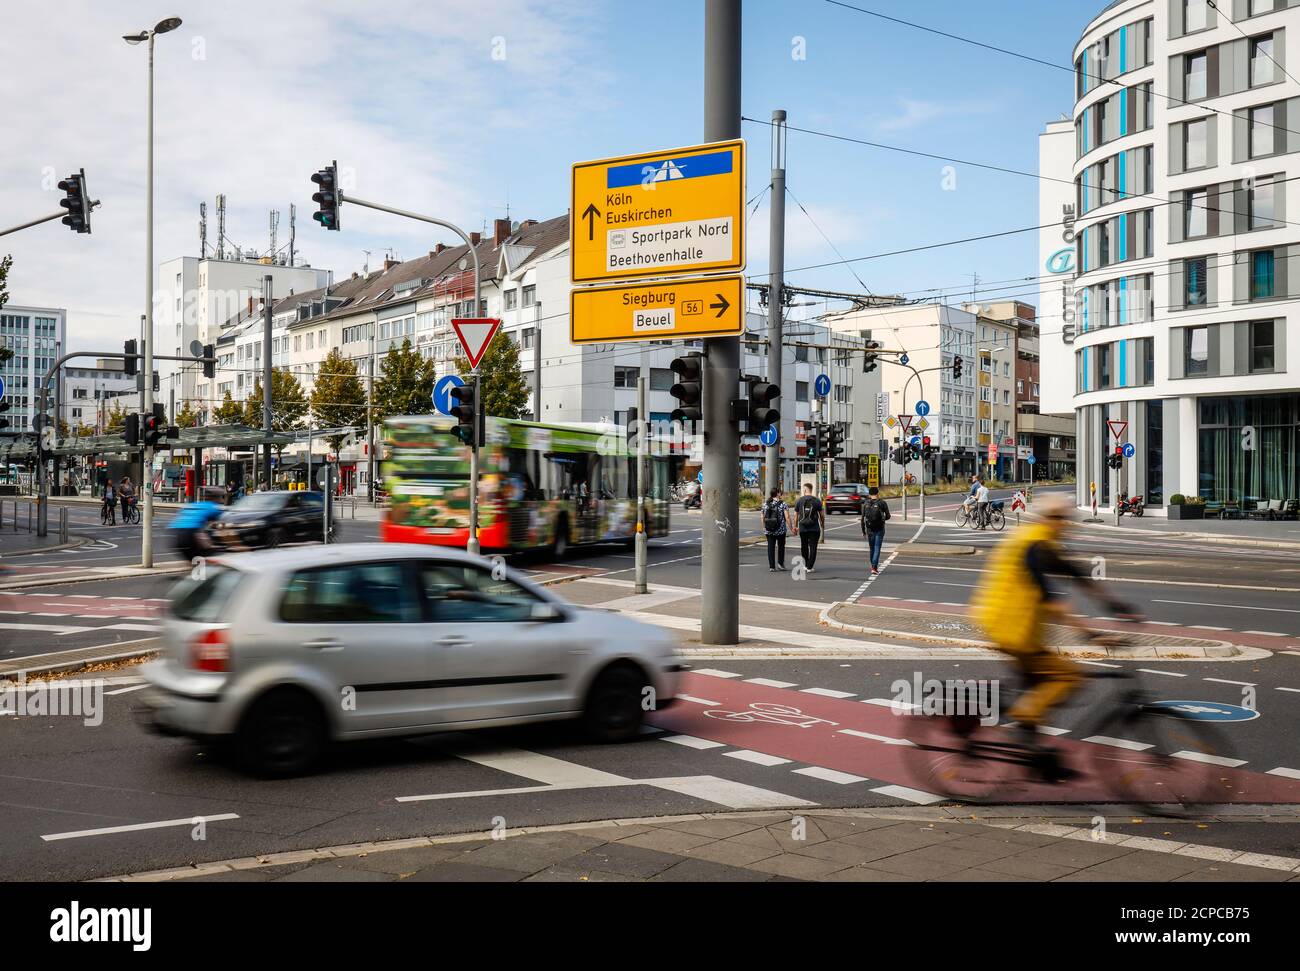 Bonn, North Rhine-Westphalia, Germany - crossroads with pedestrians, cyclists, cars and buses. Stock Photo